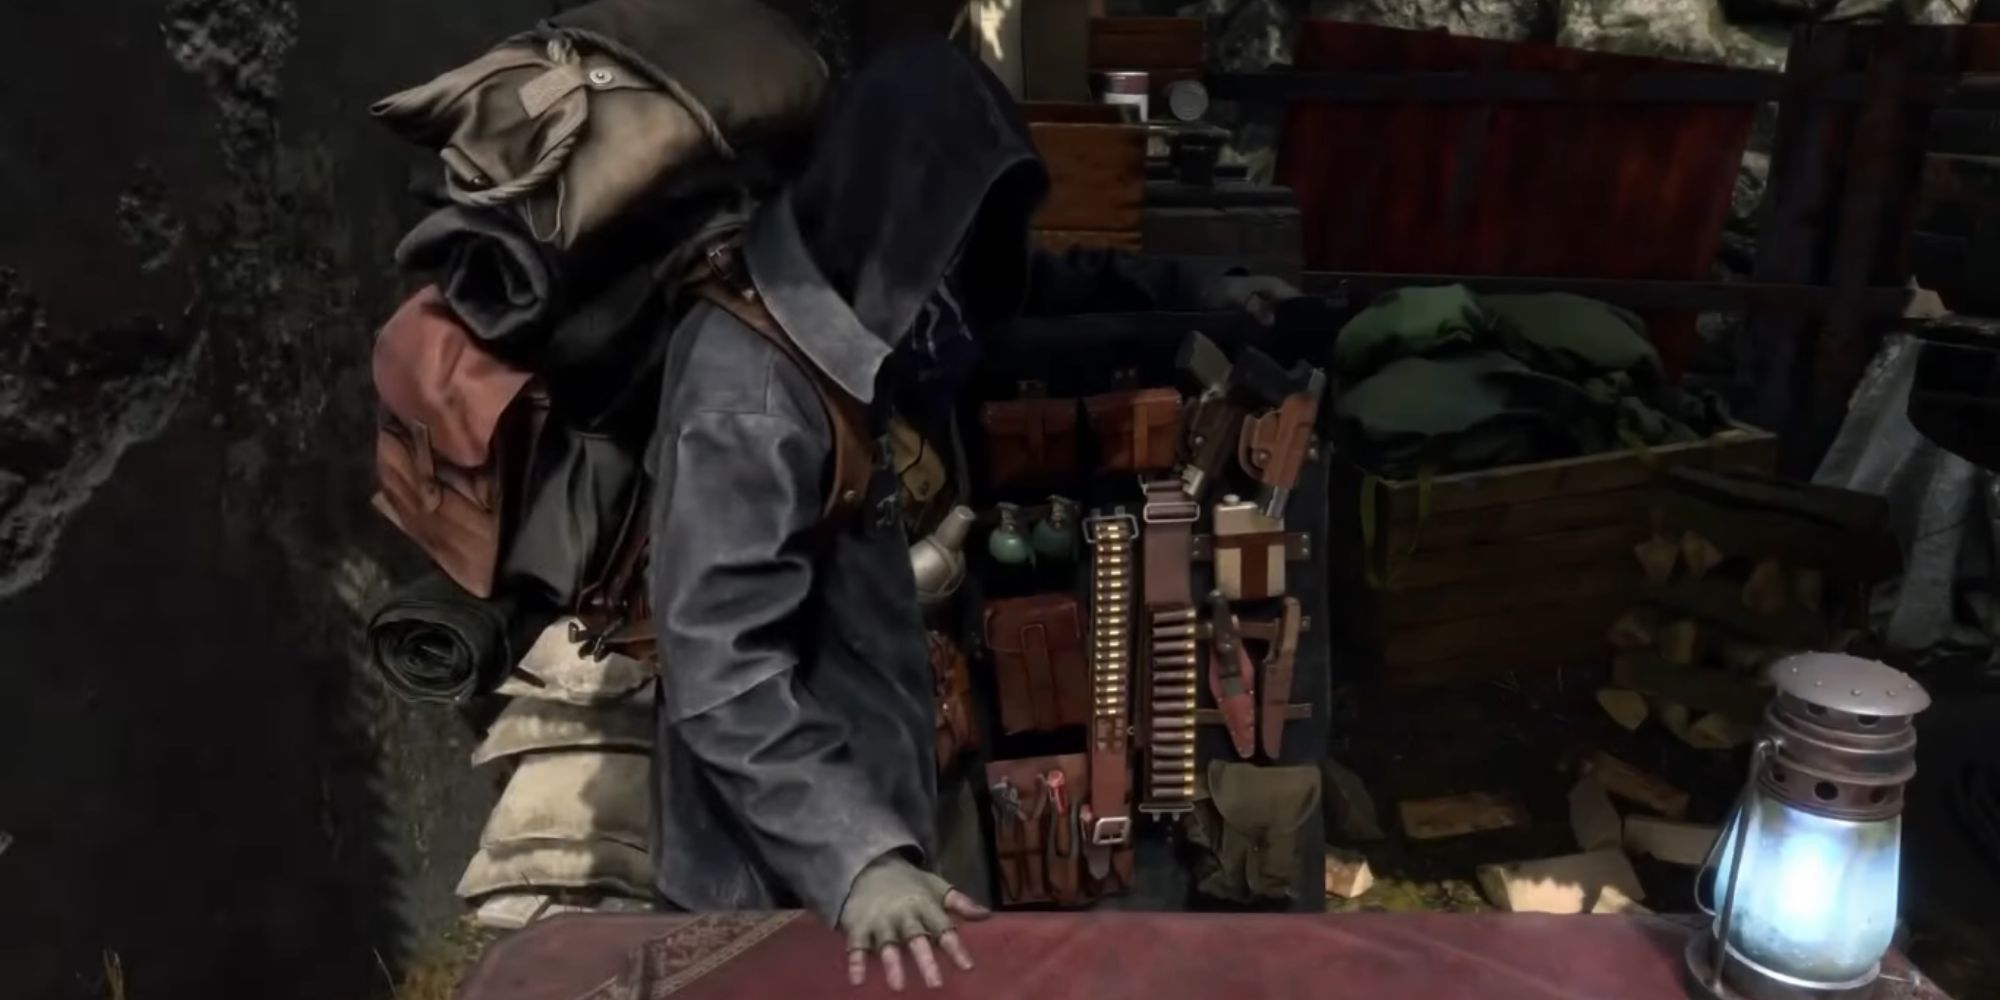 Resident Evil 4 Remake Merchant Reveals His Clothes From Behind the Table